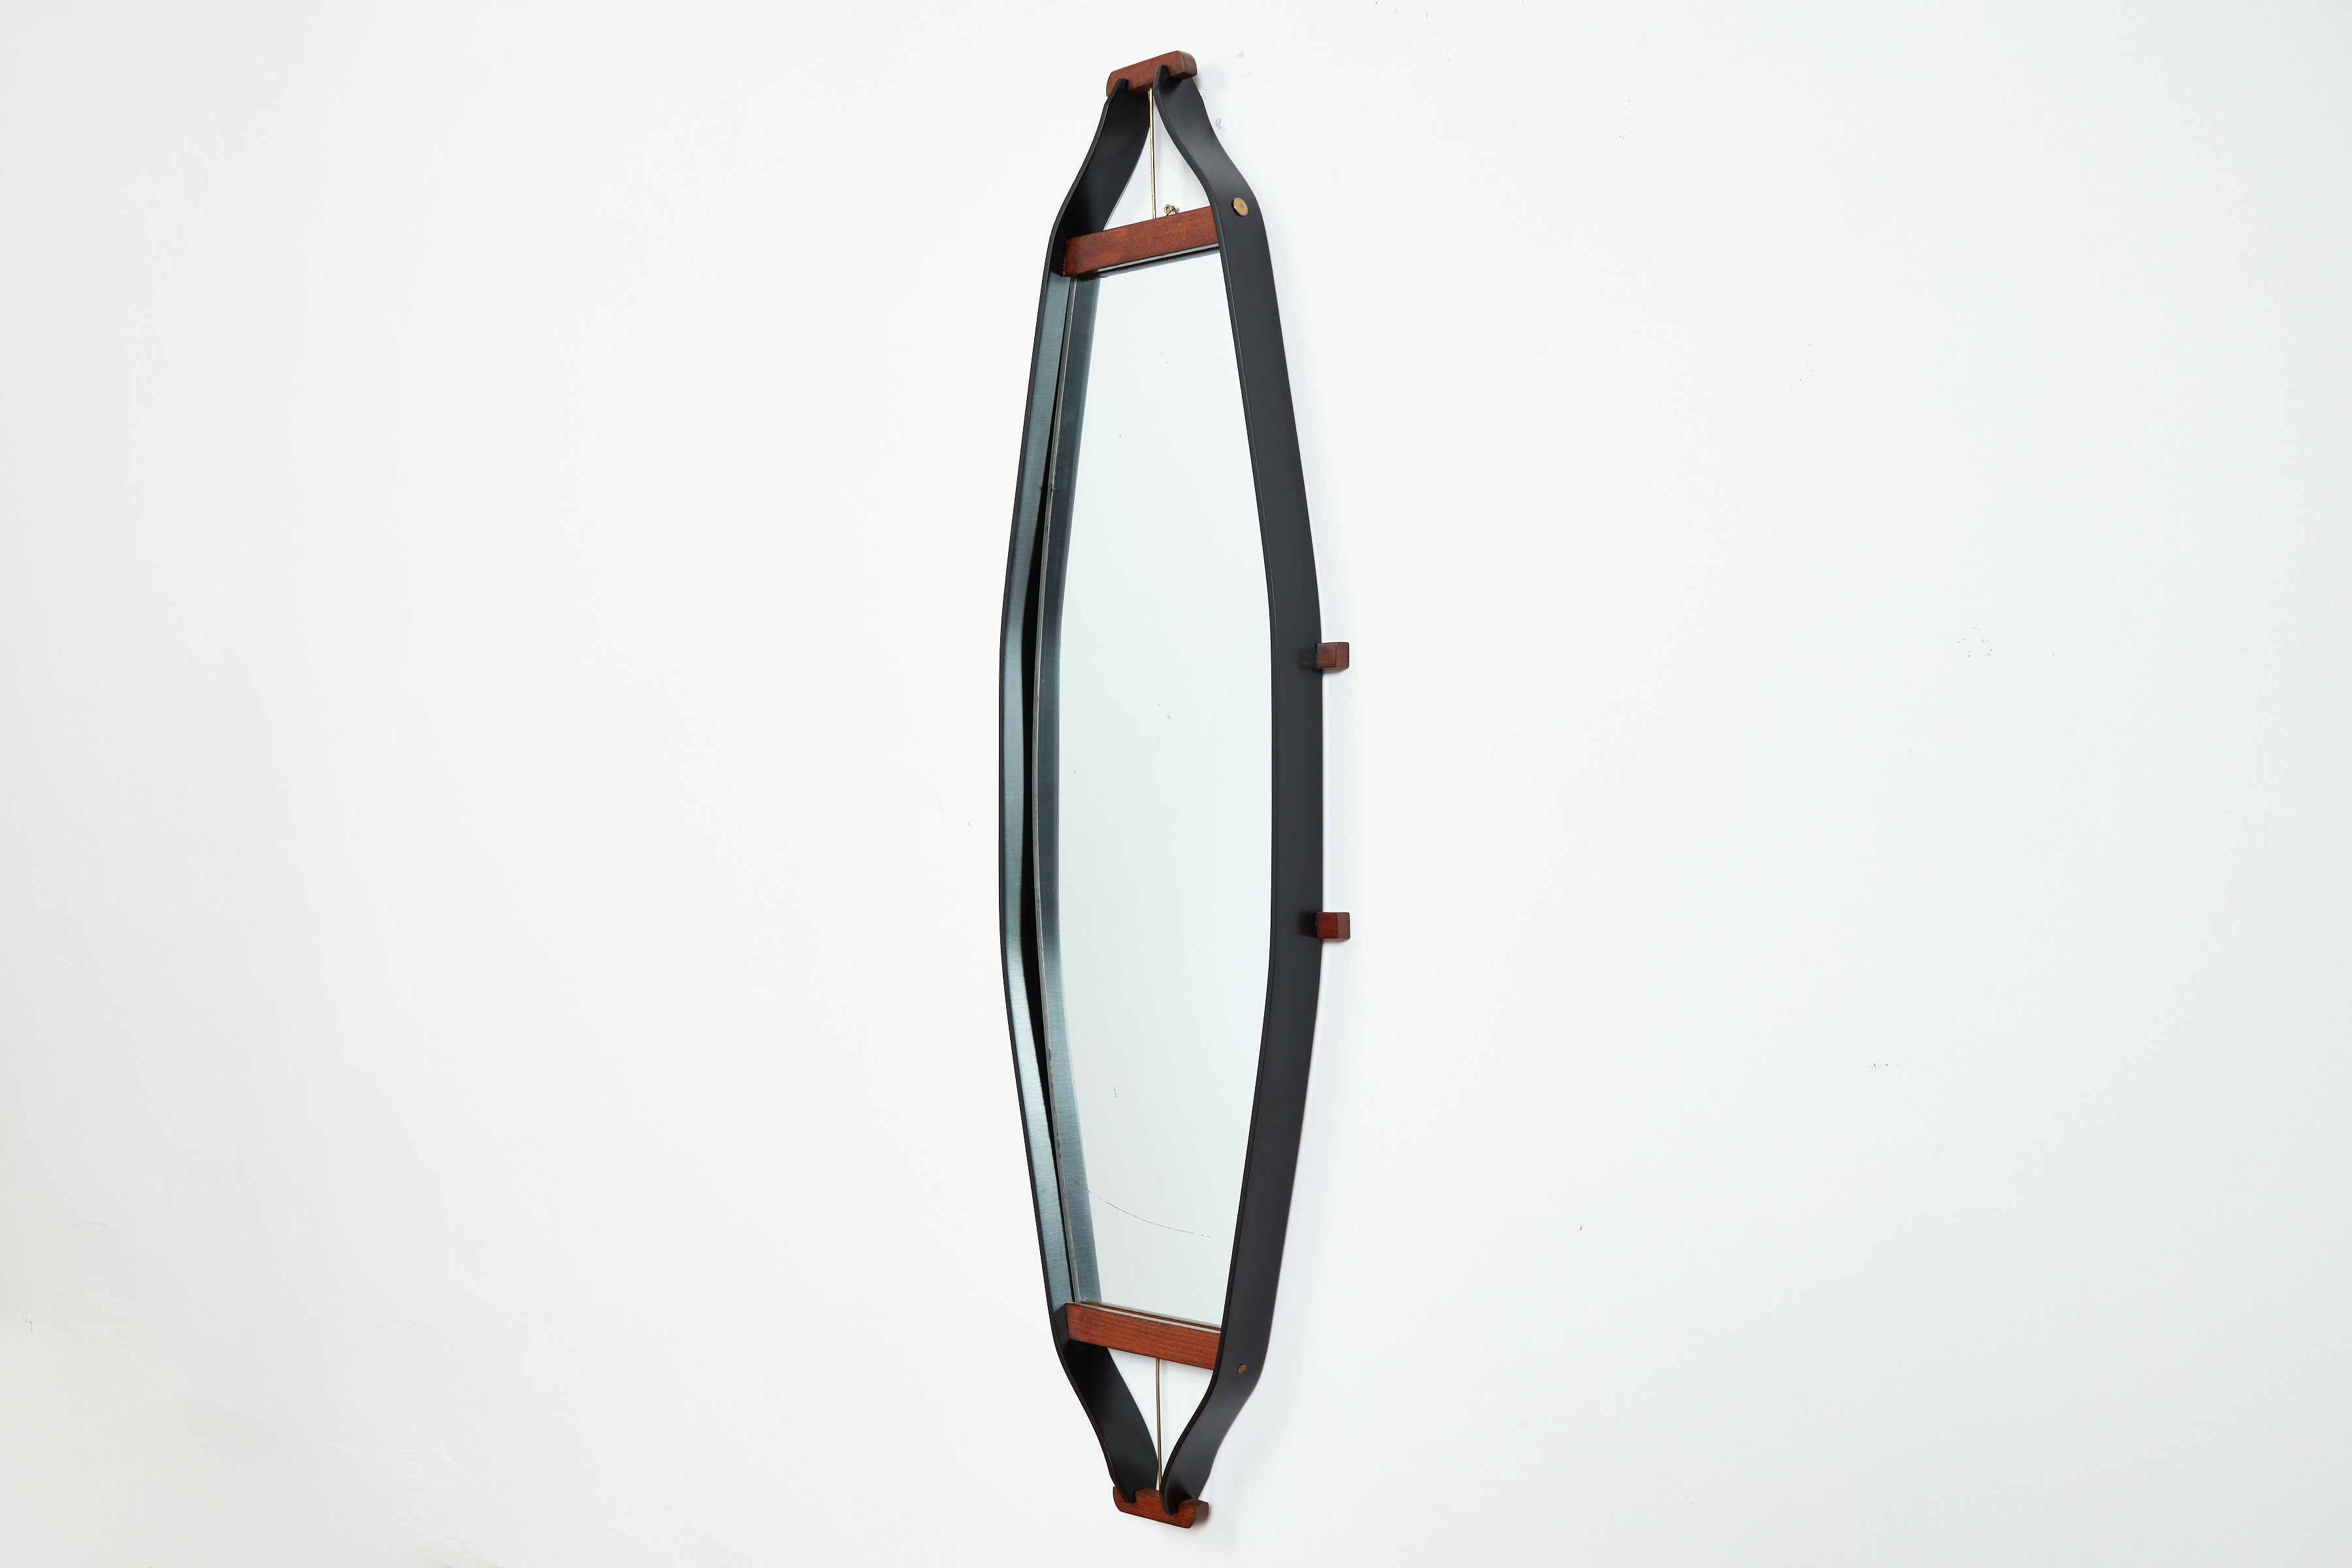 1950's Italian mirror in elongated iron frame and teak wood detailing with brass hardware.  Unique in shape and excellent craftsmanship. 
Original tag from Bologna, Italy. 